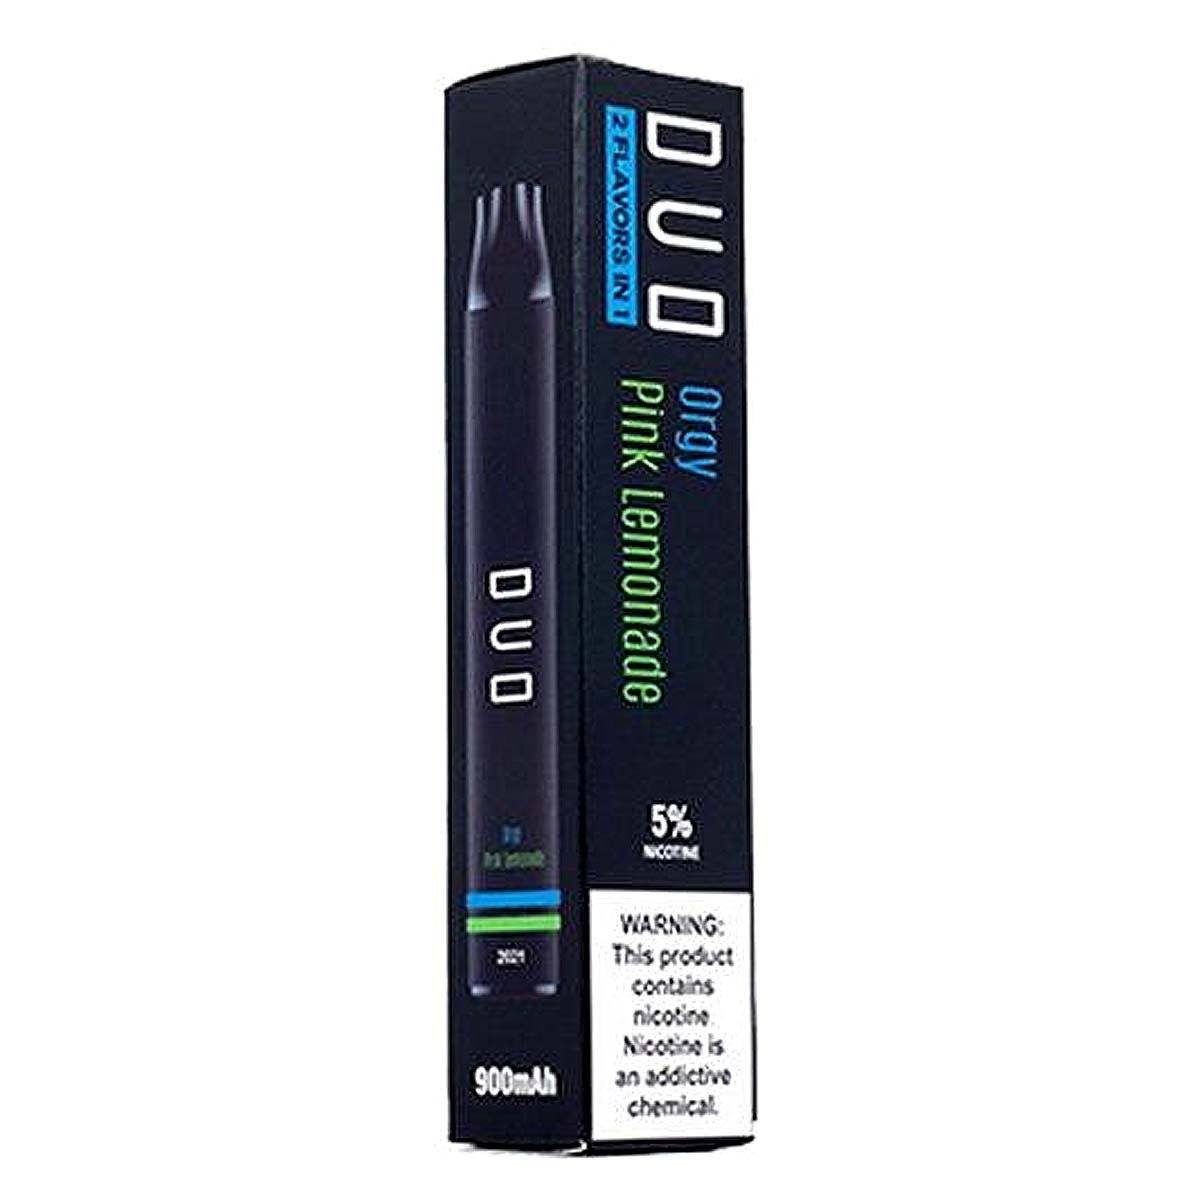 DUO Disposable Device | 1500 Puffs pink lemonade packaging